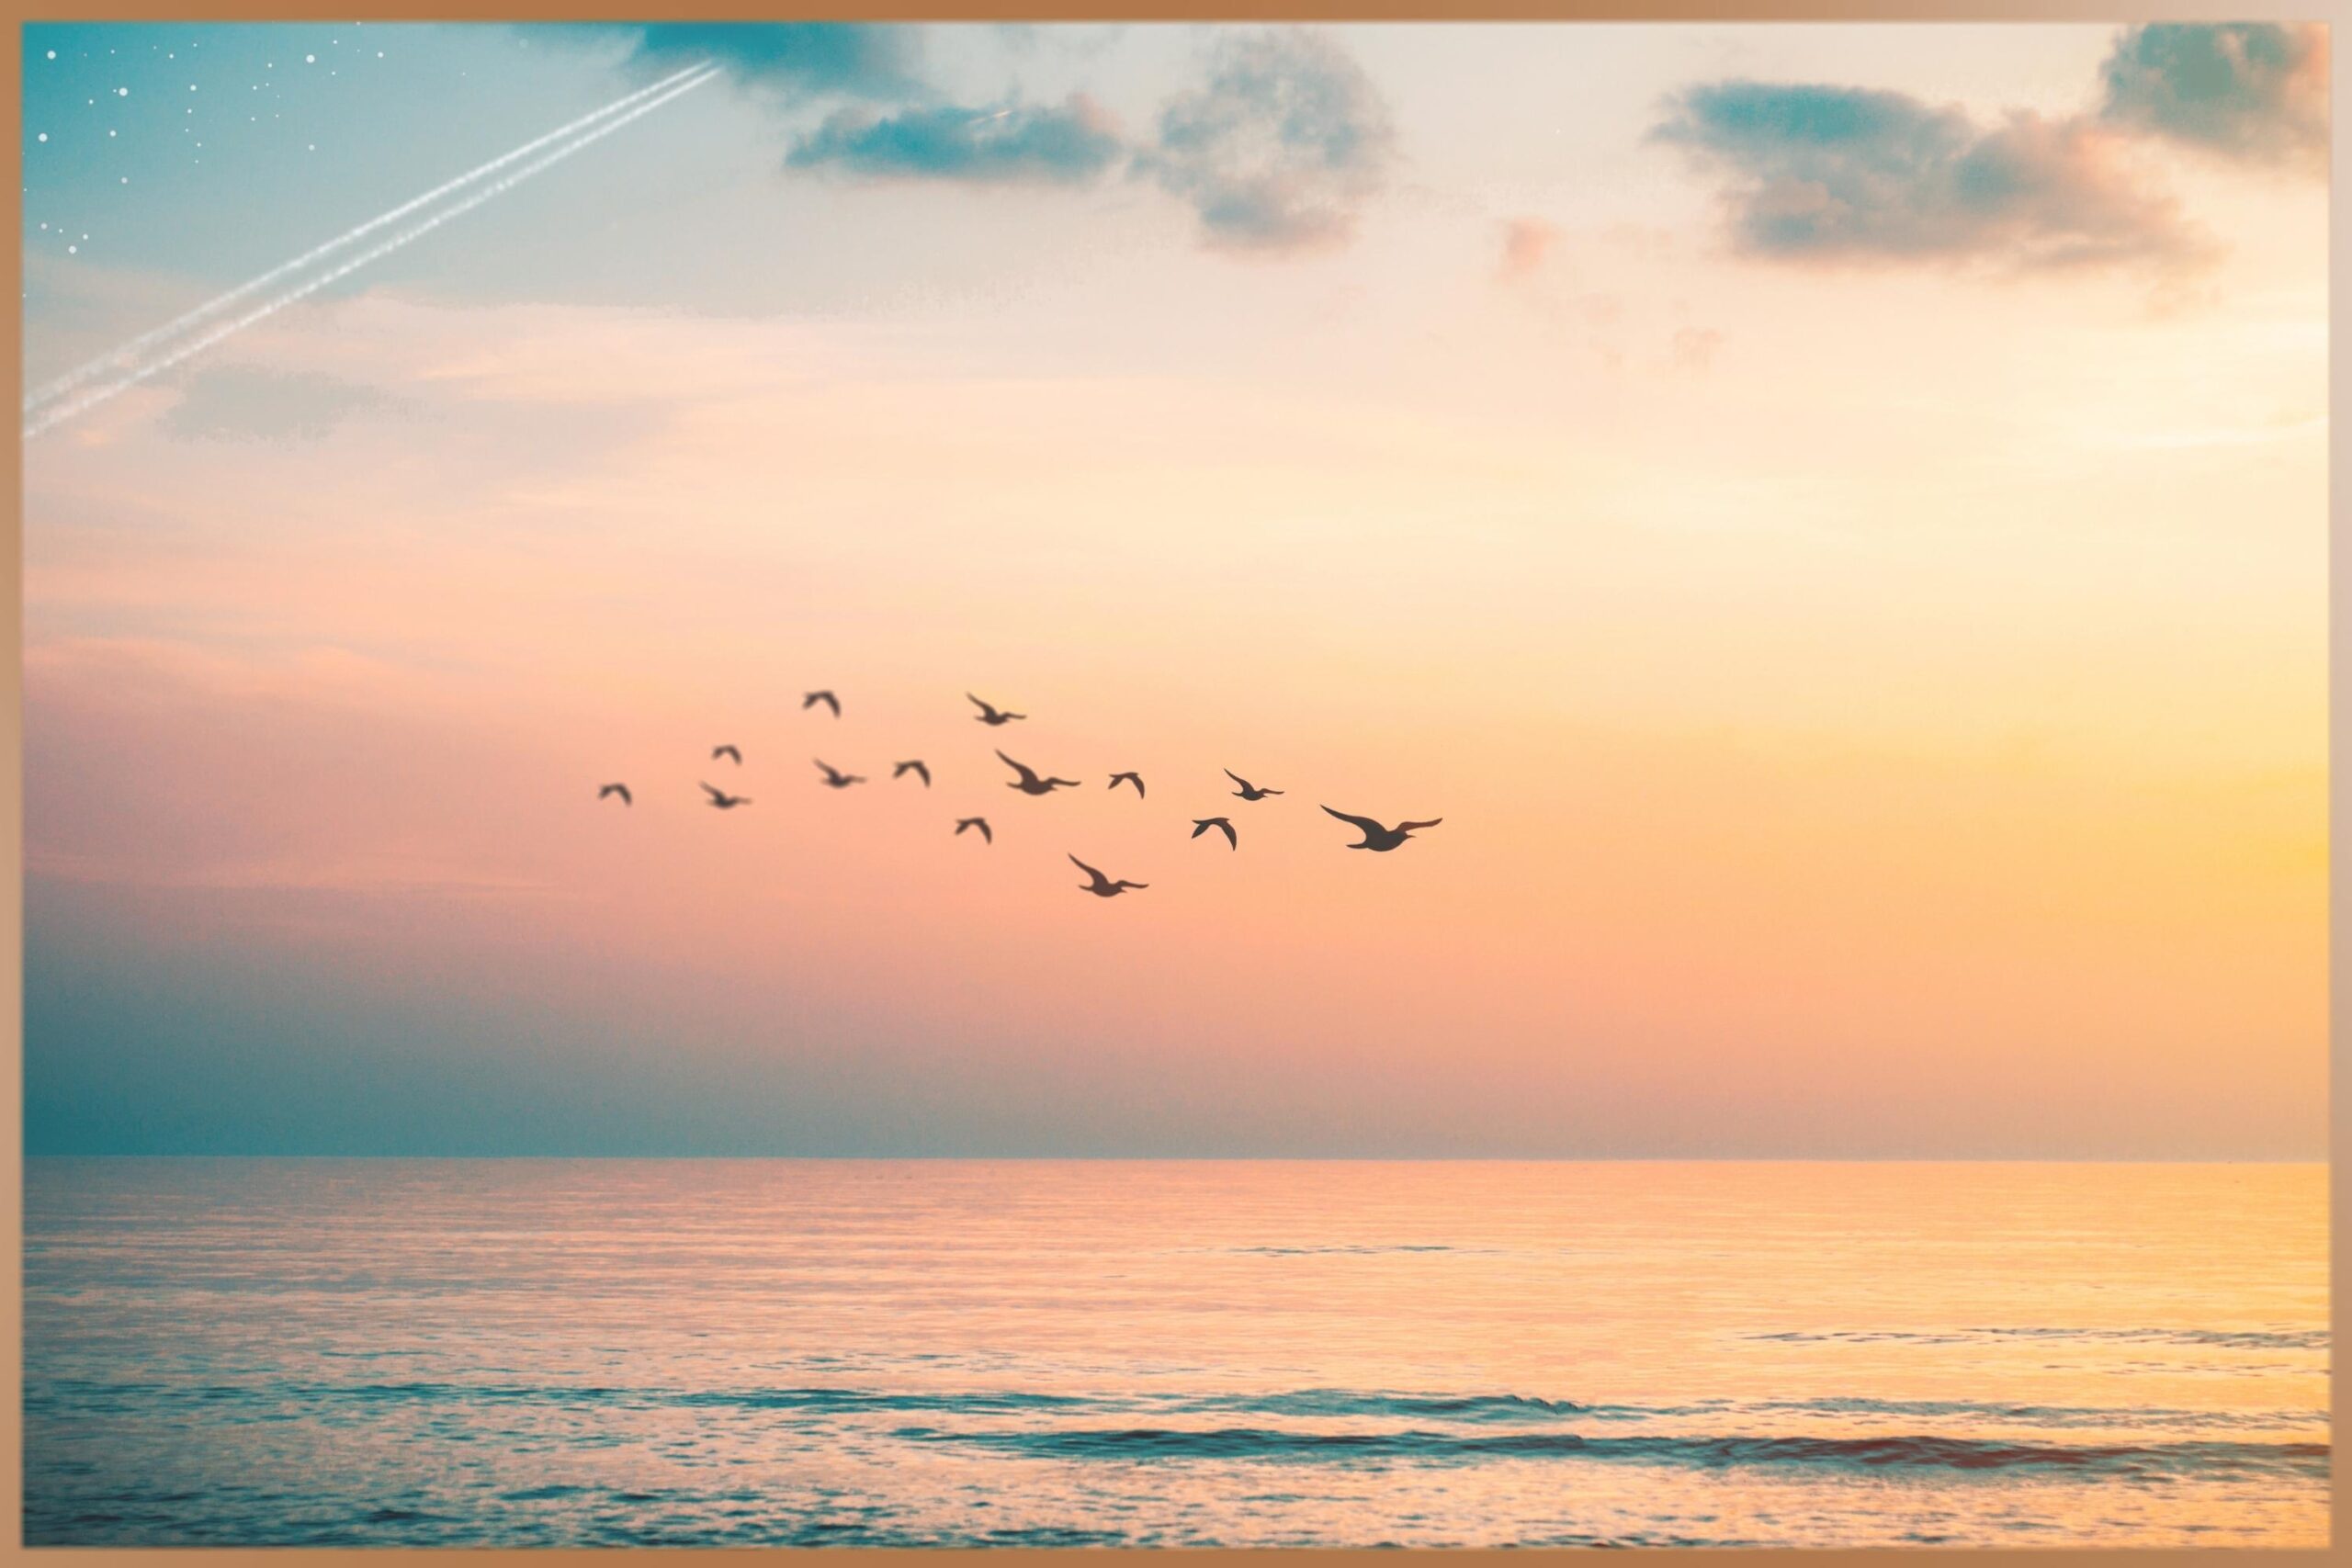 Sunset at the sea with flying birds gives a feeling of calmness